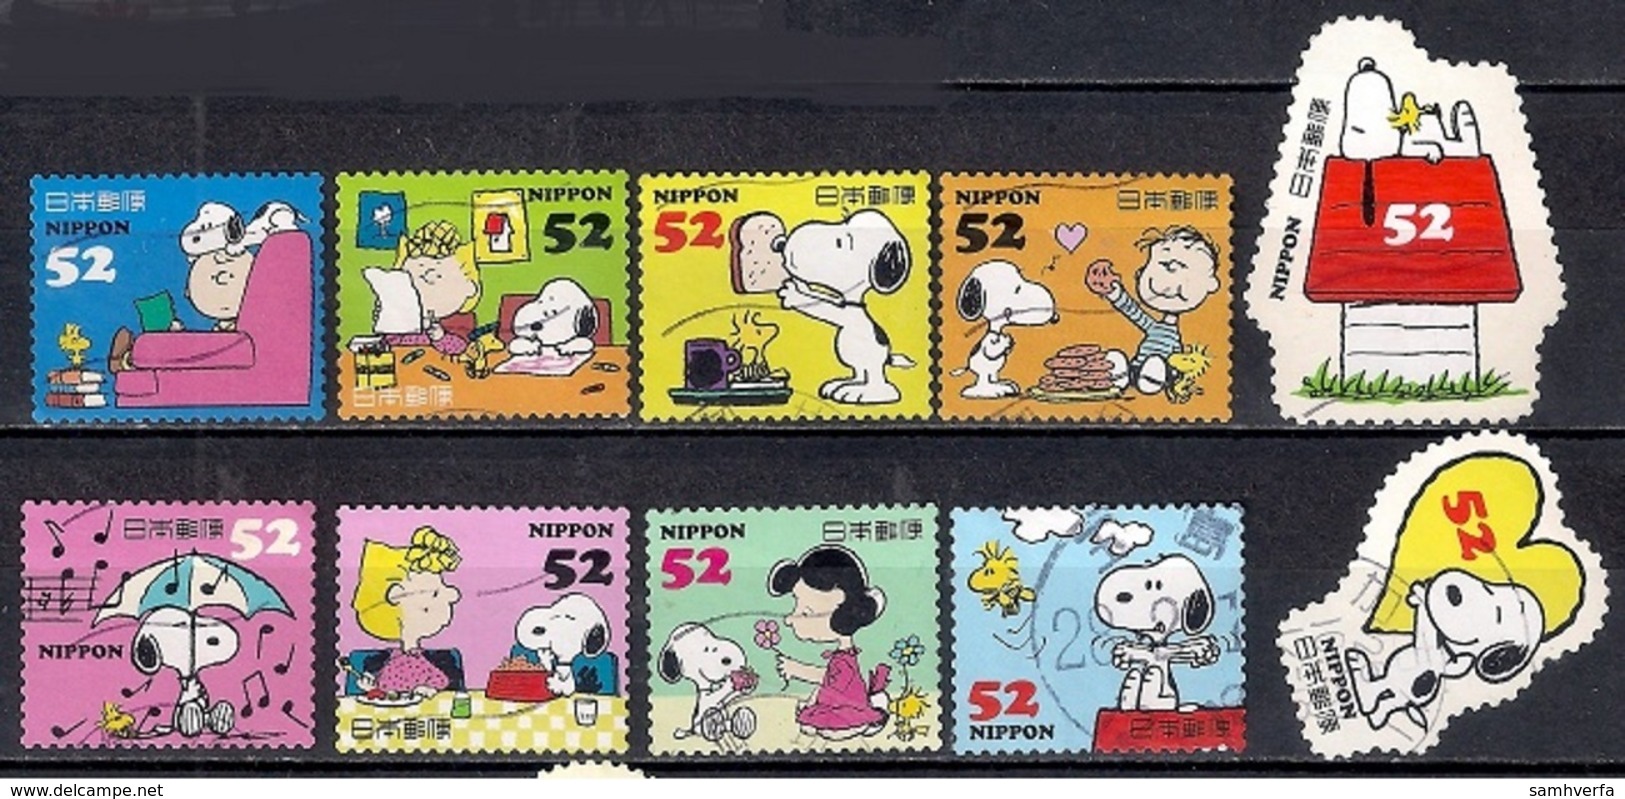 Japan 2014 - Snoopy And Friends (52 Yens) - Used Stamps